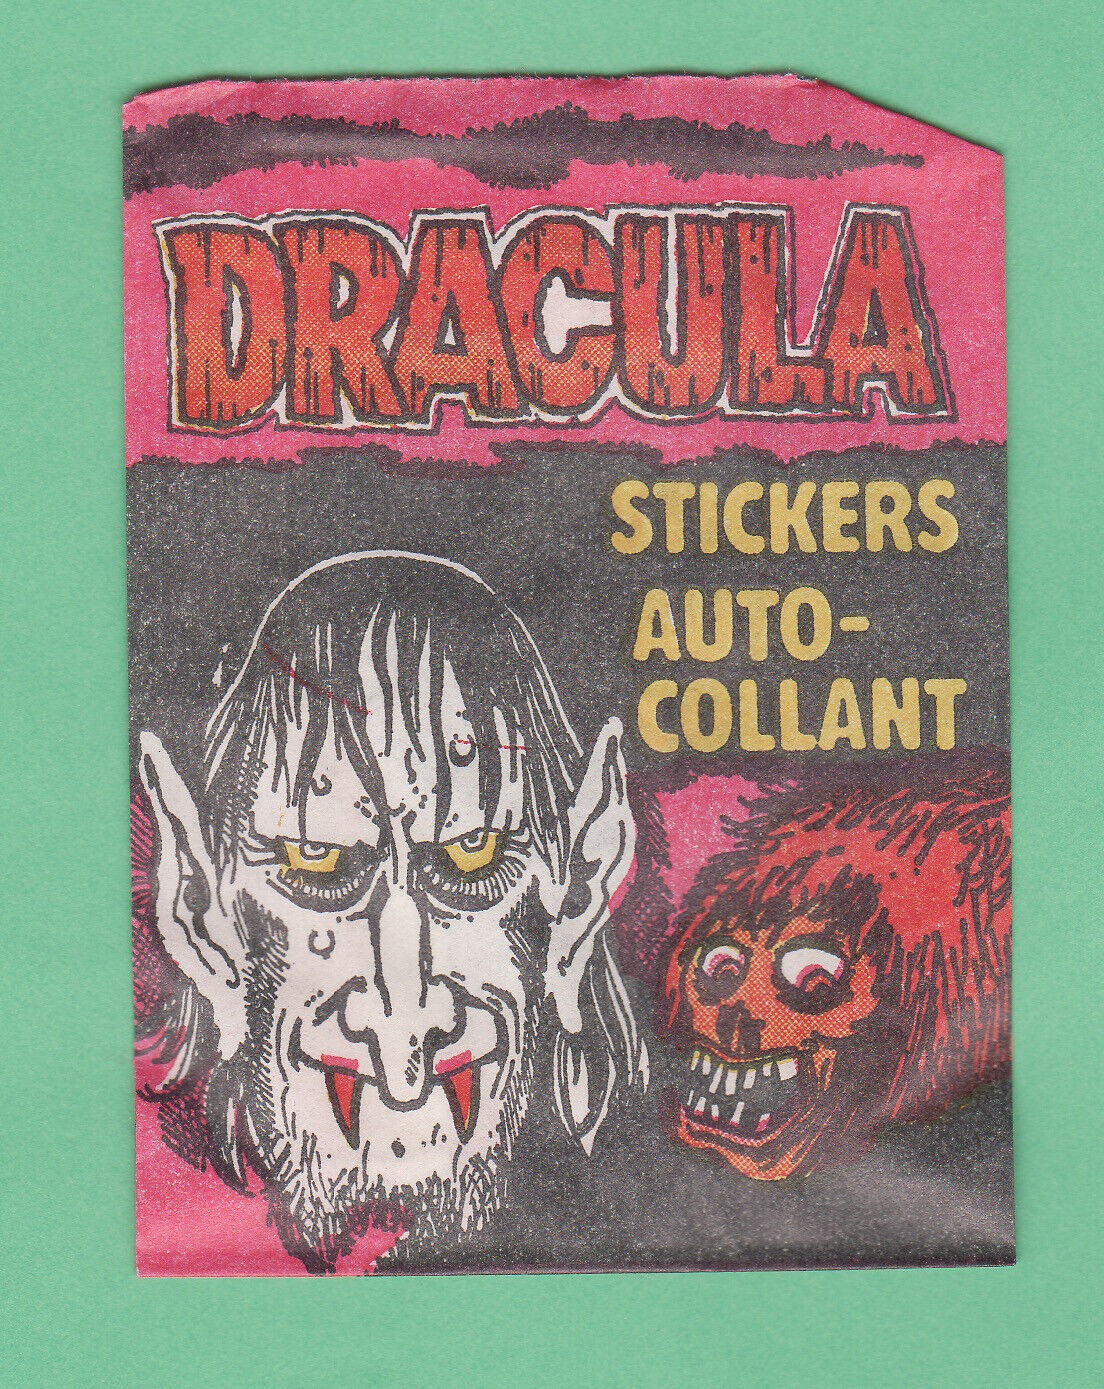 1972 Monty Gum Dracula Stickers Unopened Pack Fresh From box